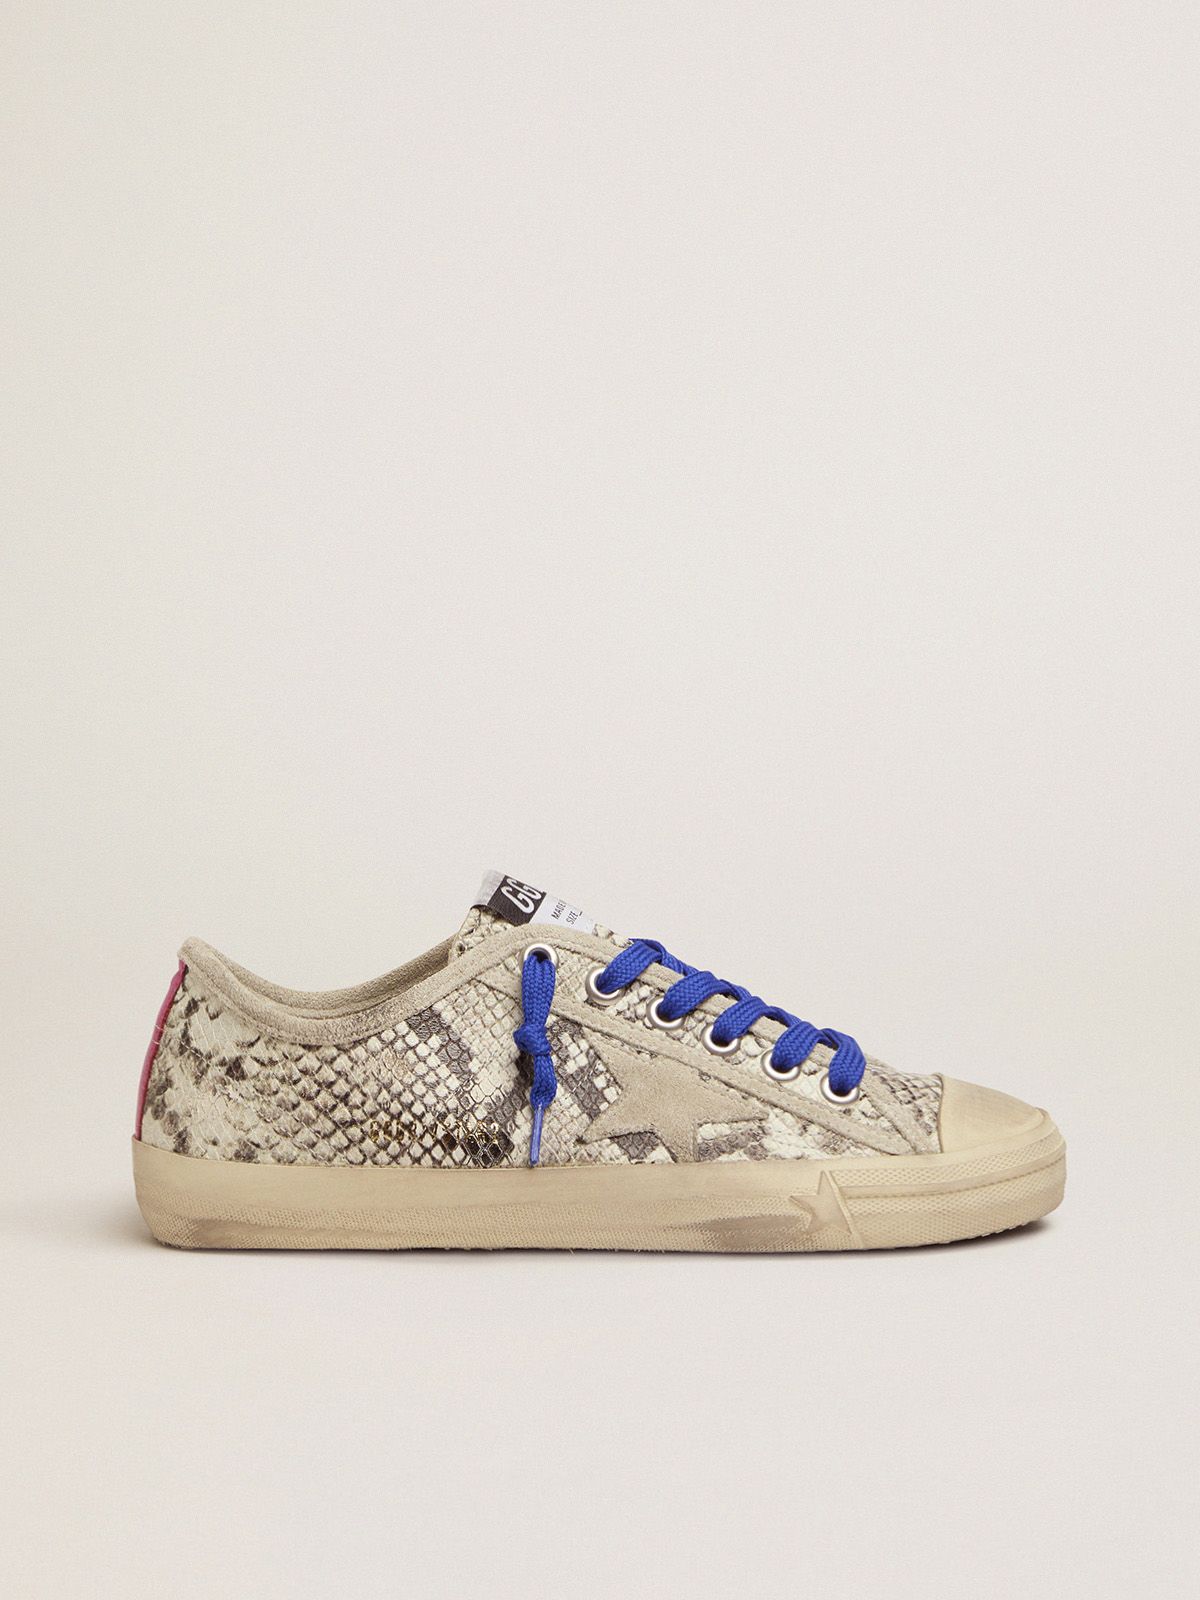 golden goose snake-print sneakers insert in V-Star fuchsia leather with